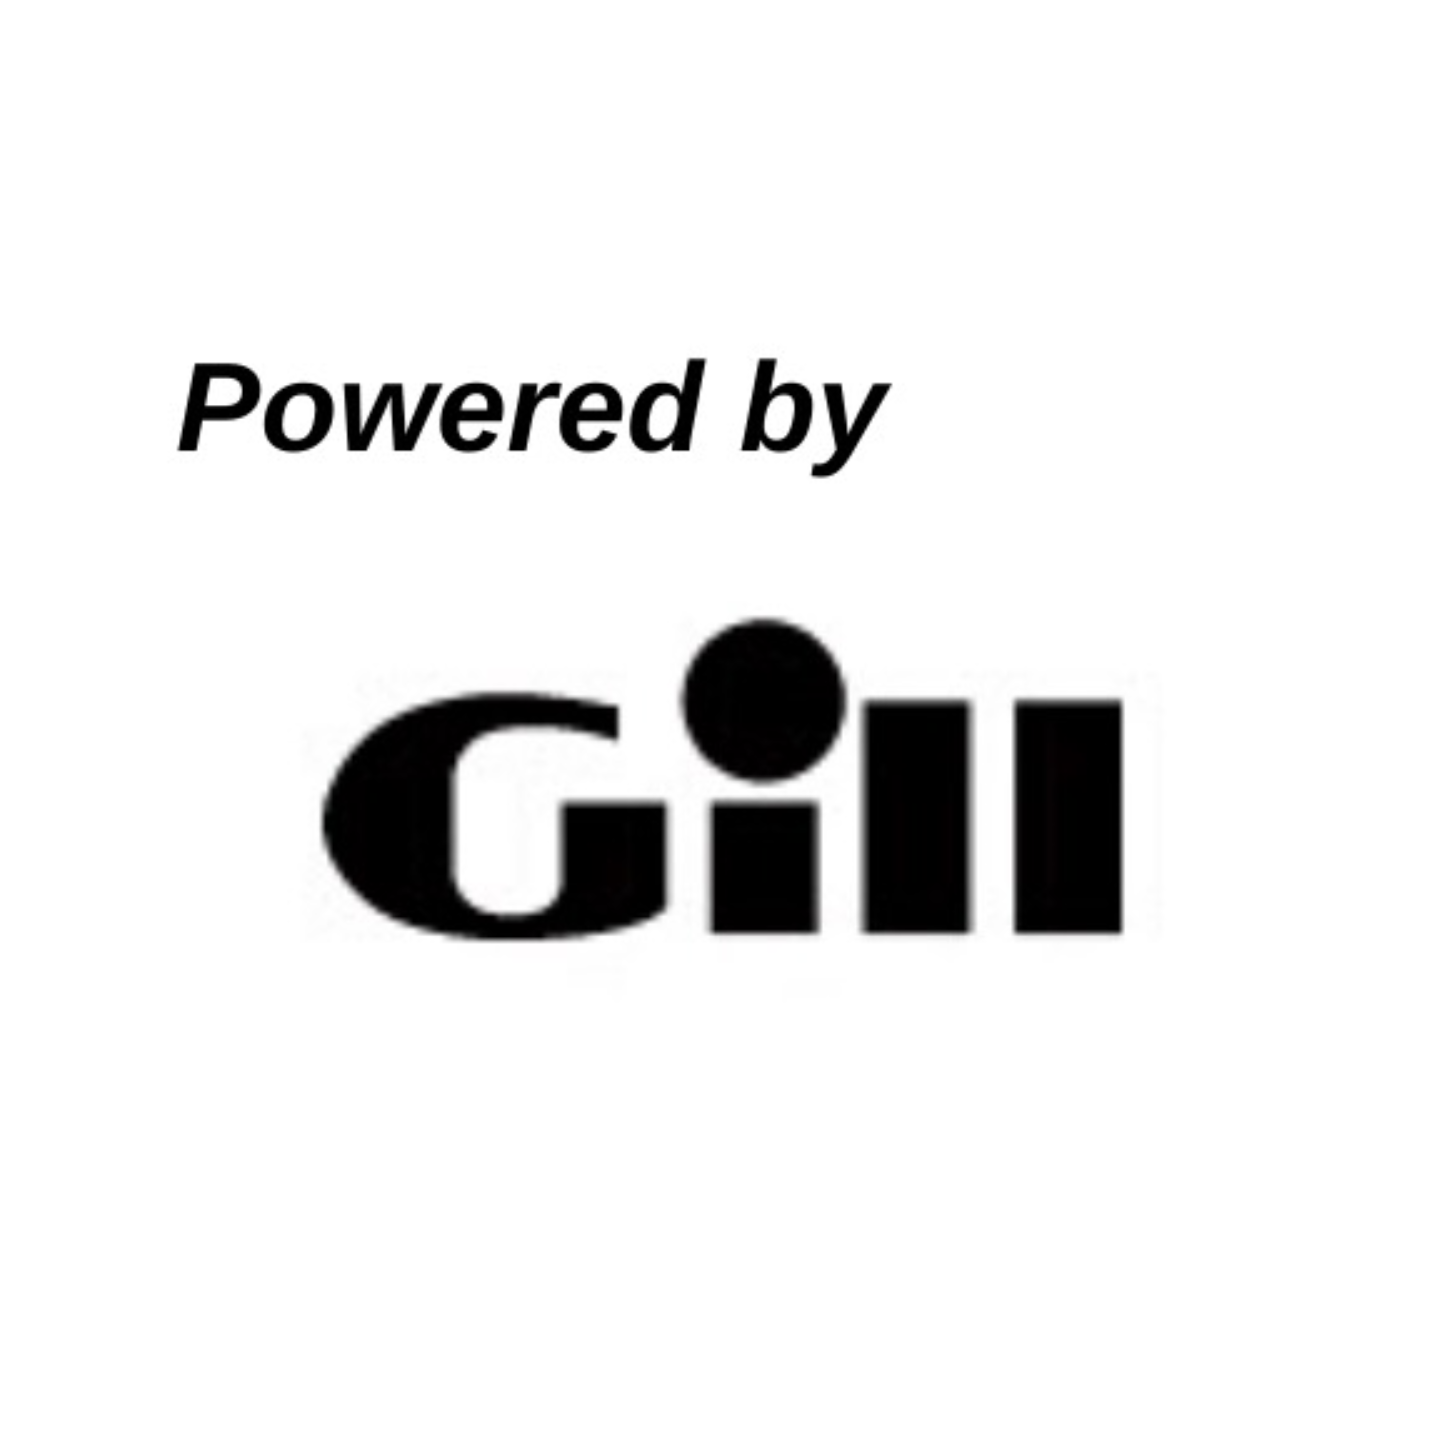 Powered by Gill Logo.png